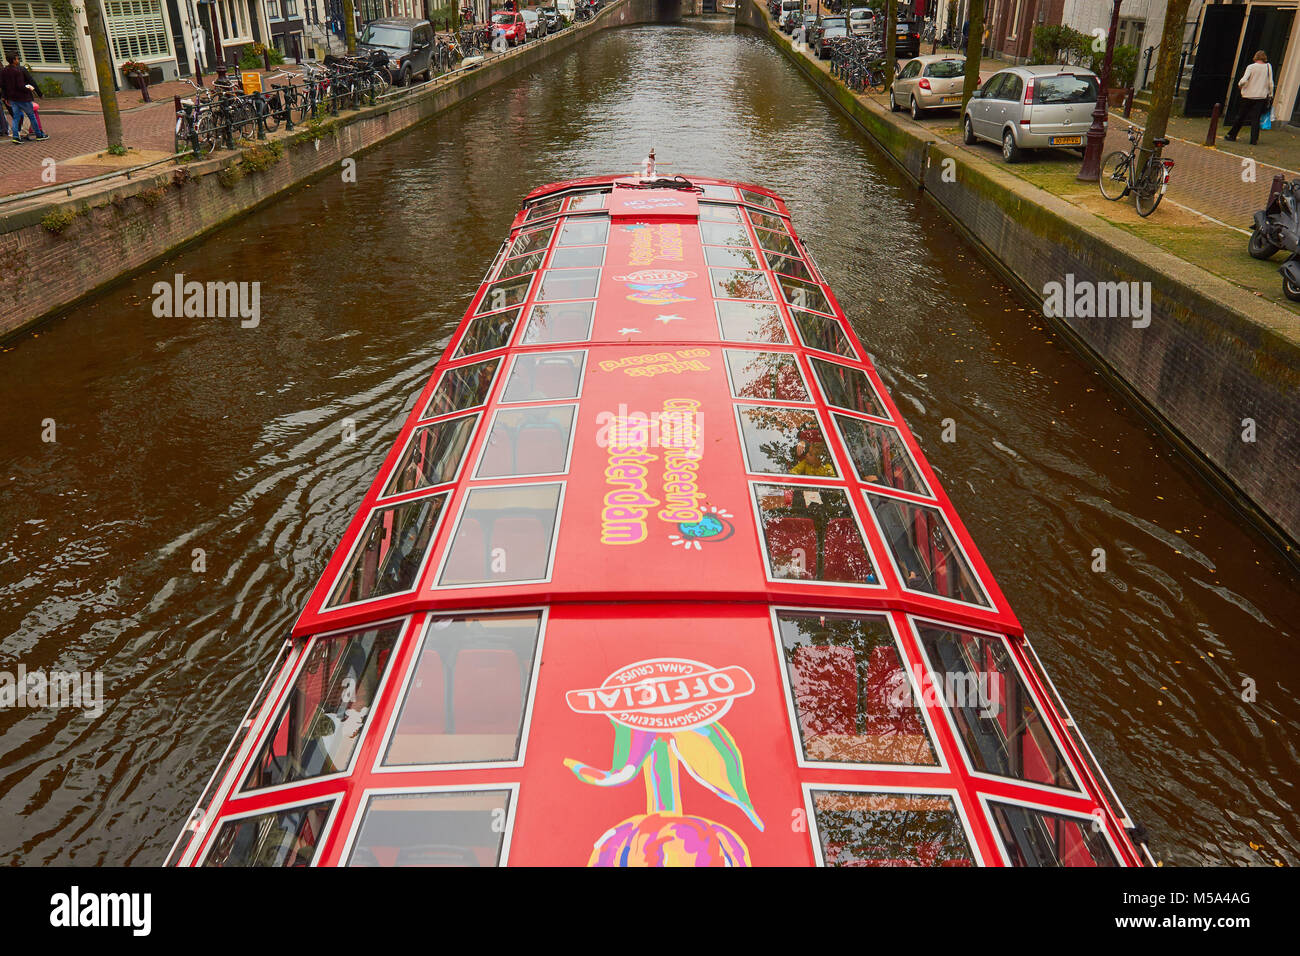 City sightseeing cruise boat from above, Amsterdam, Netherlands Stock Photo